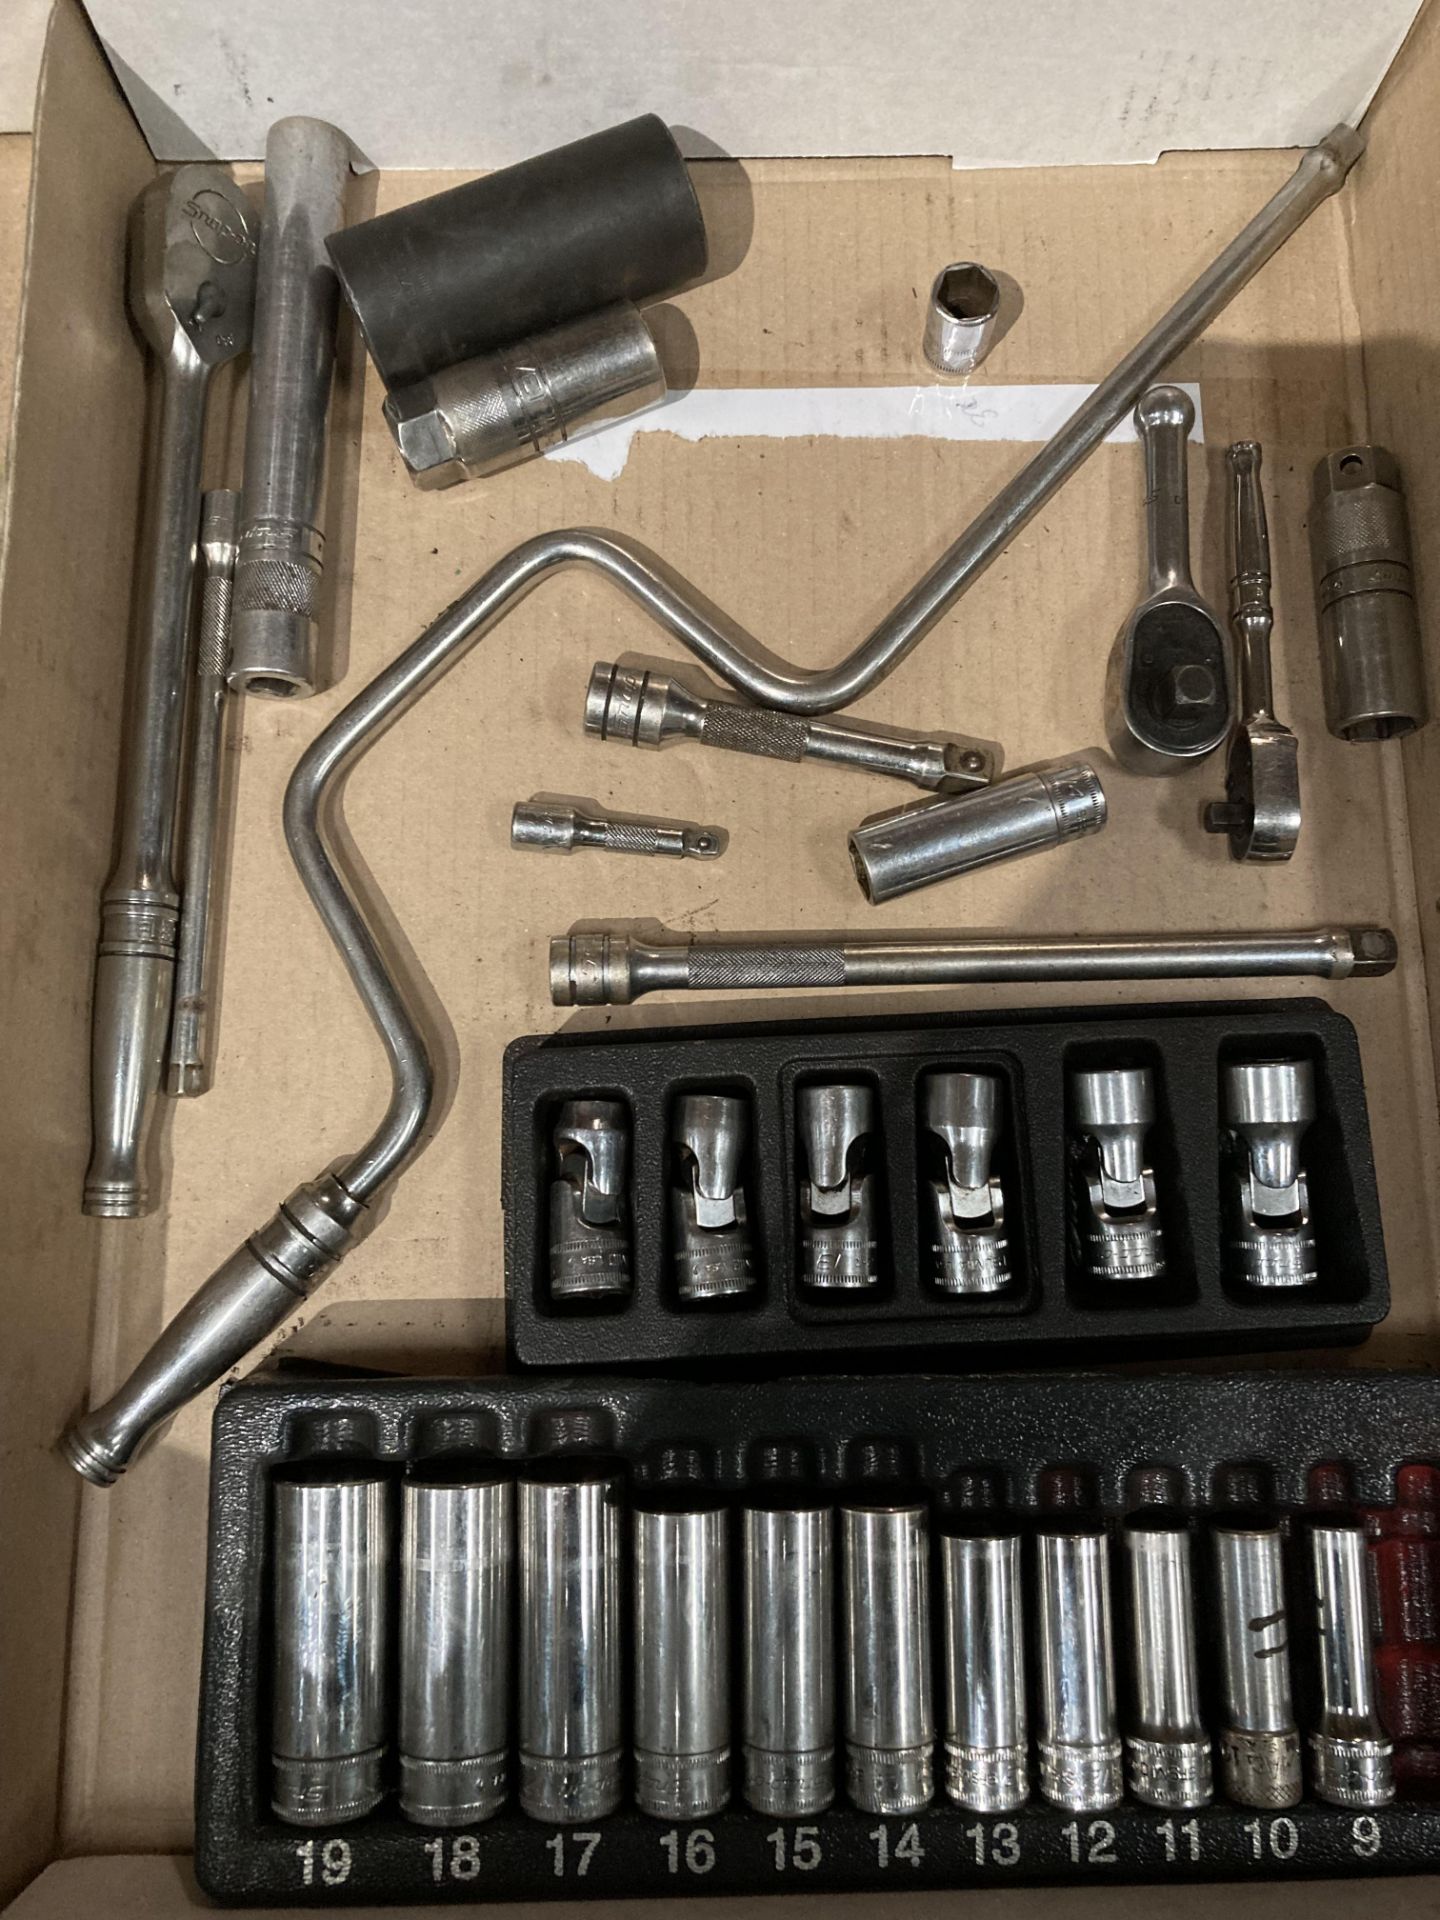 31 assorted pieces of Snap-on sockets, wrenches, extender's etc.